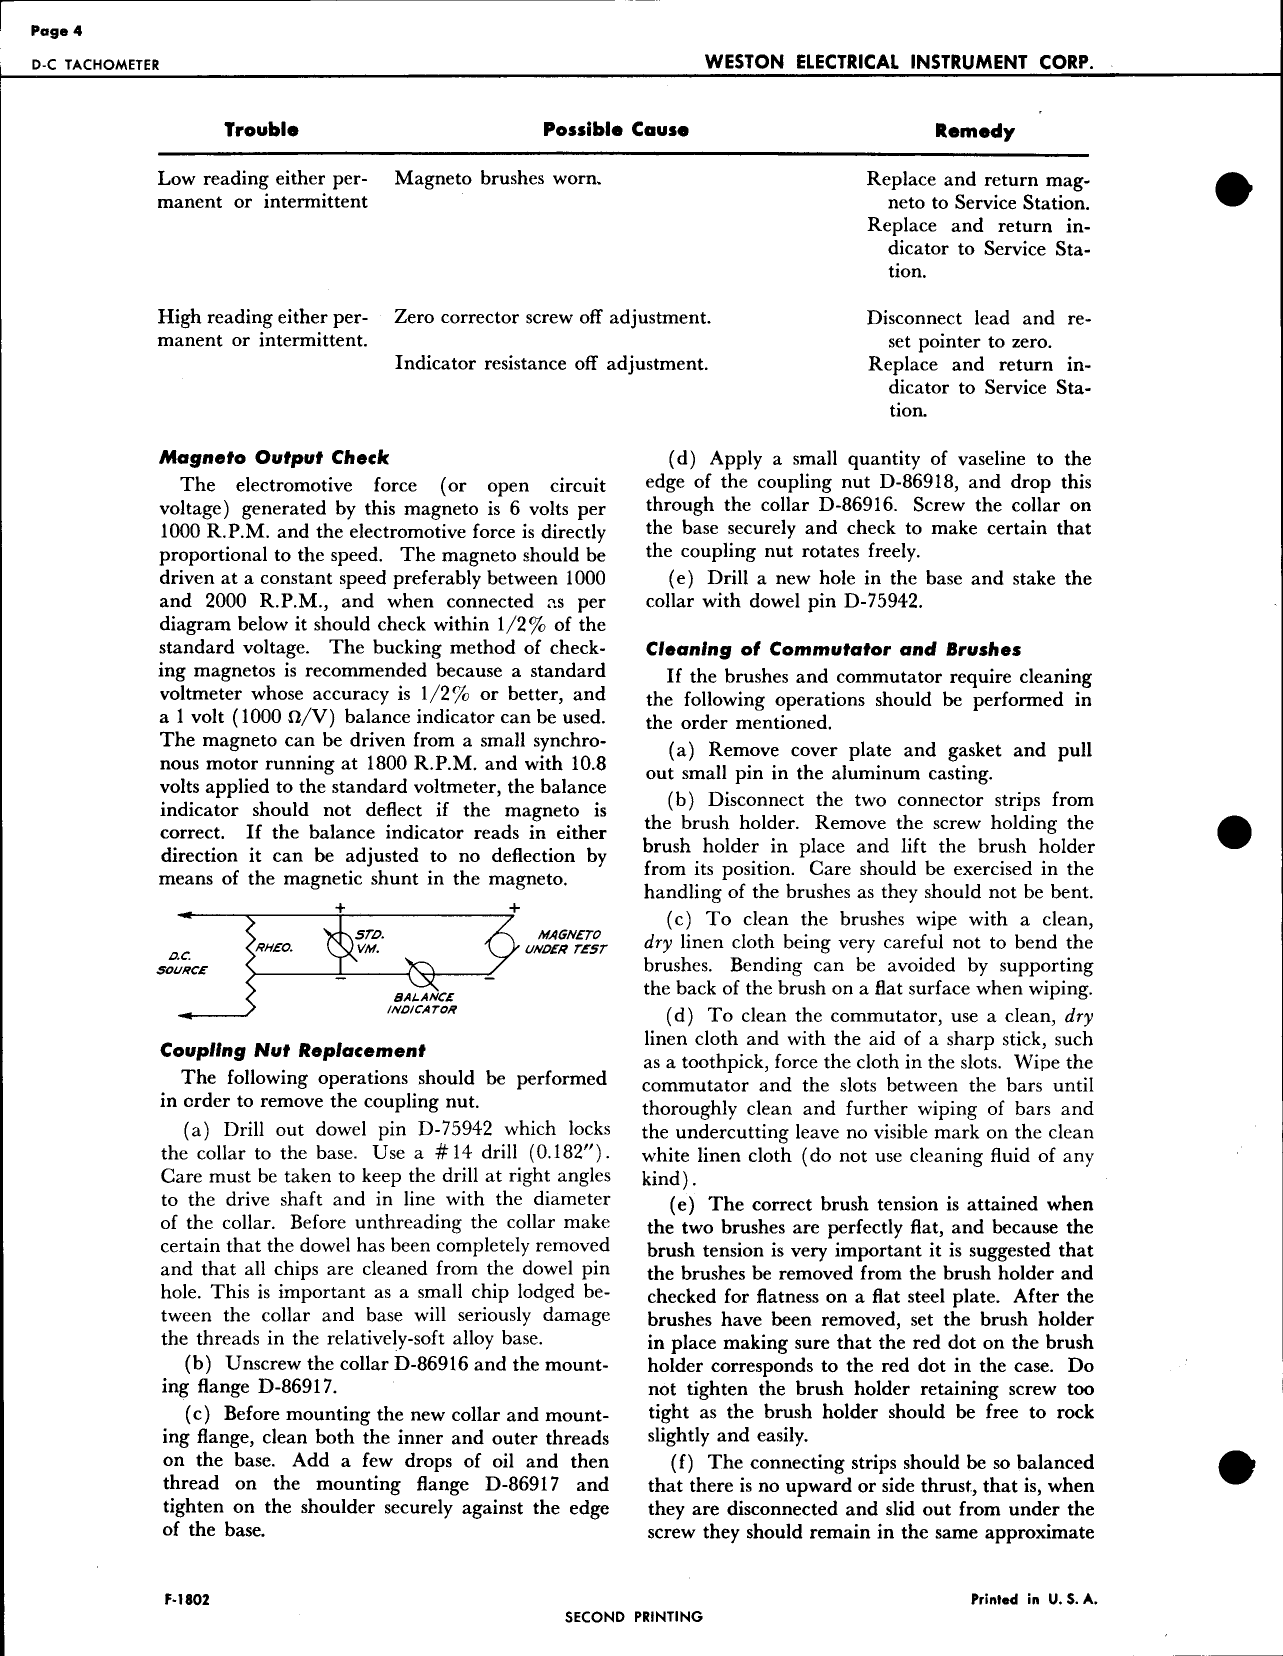 Sample page 4 from AirCorps Library document: Service Instructions for D-C Tachometer 724 Mag & 545 Indicator